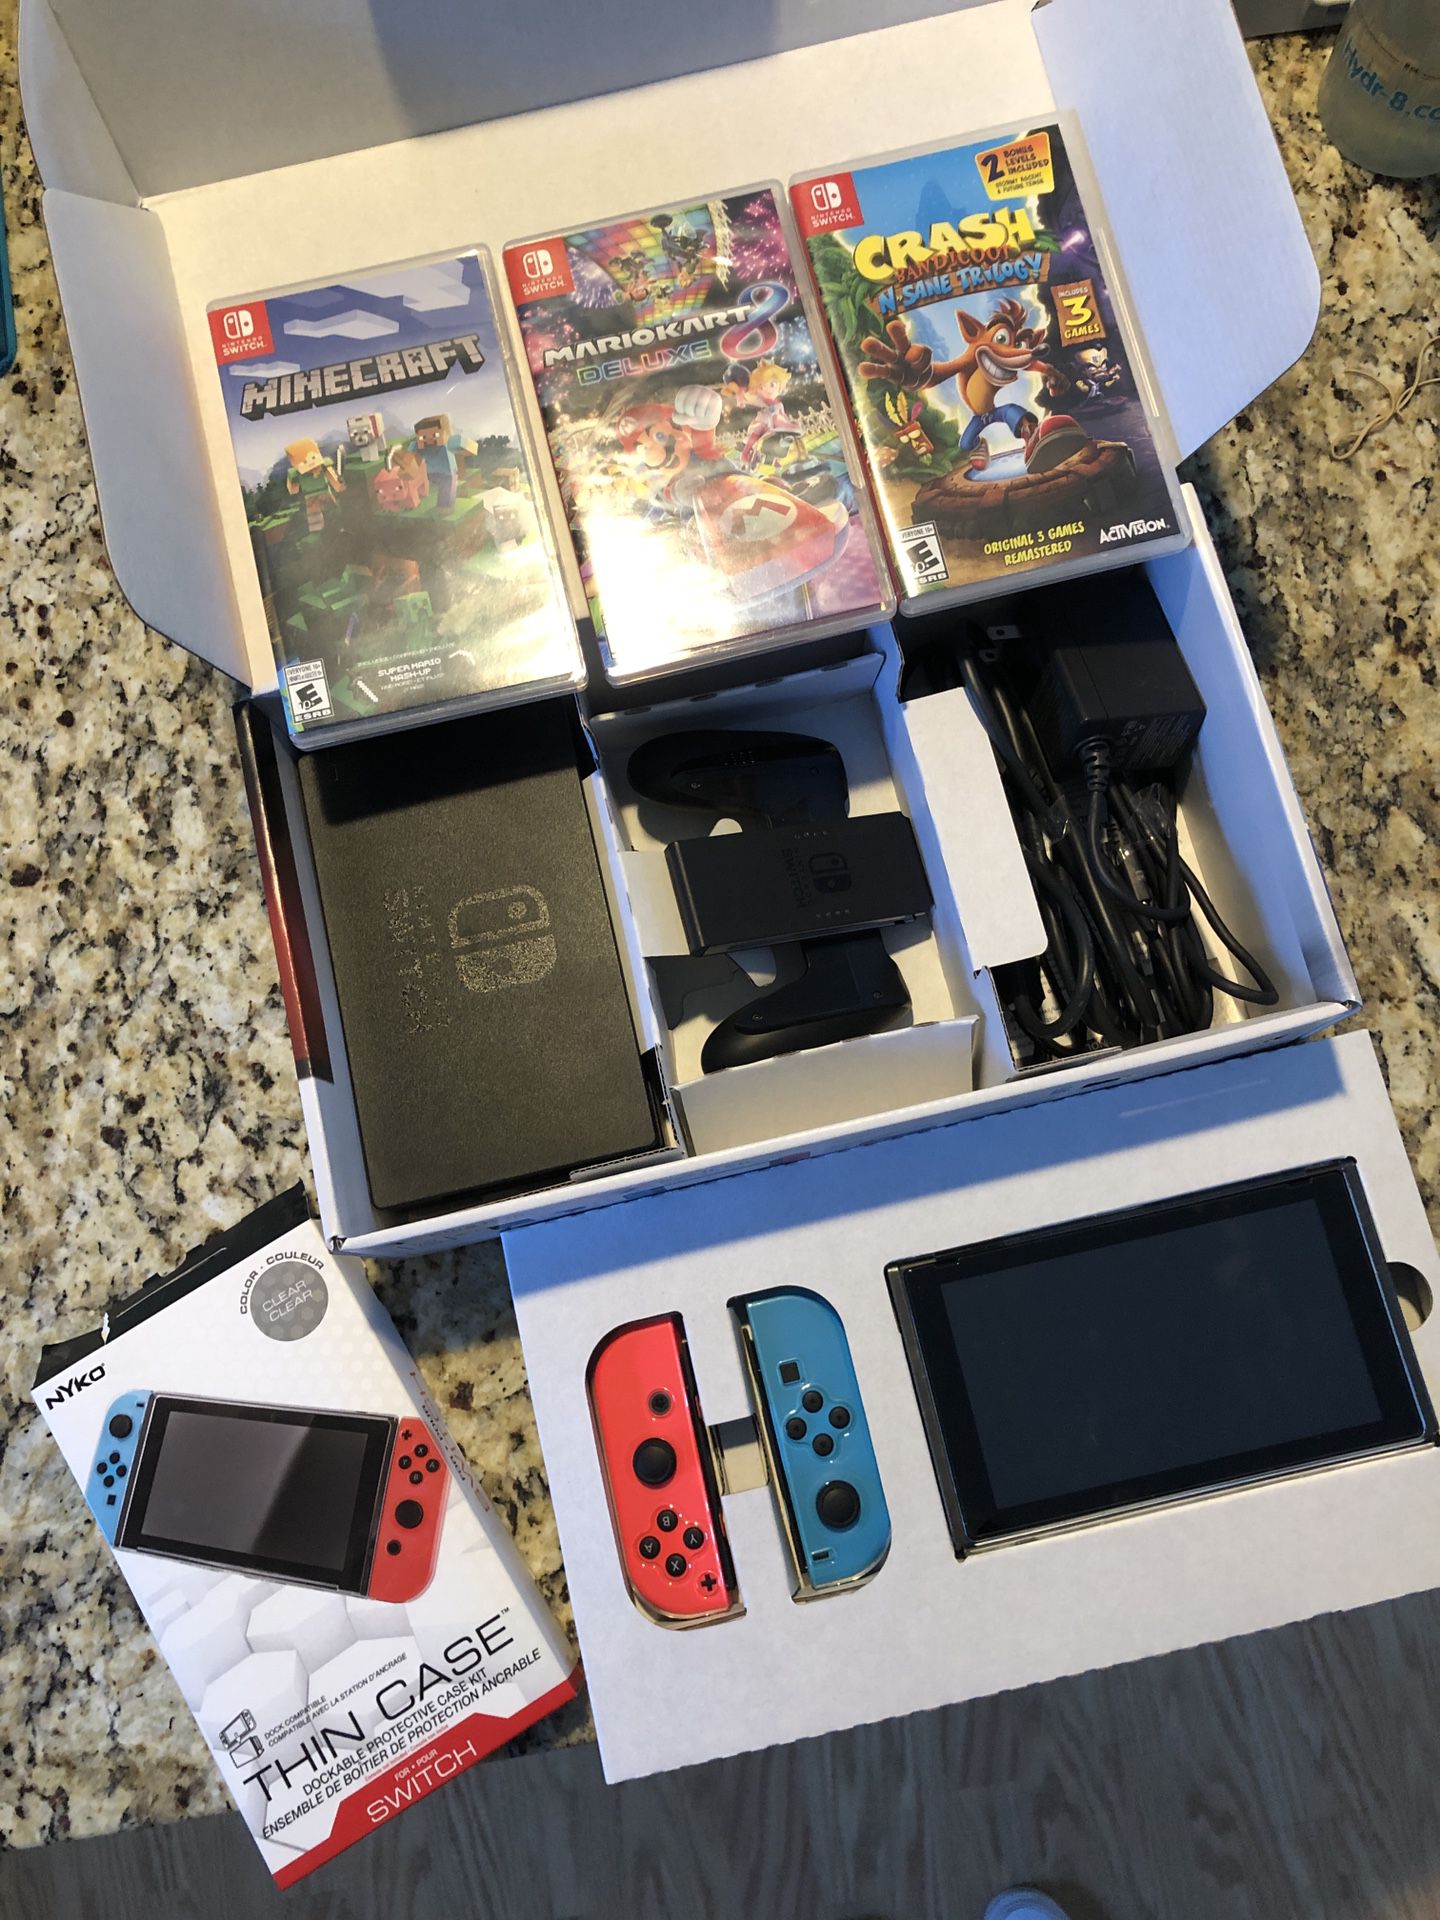 Nintendo switch with case, extra screen protector and three games.